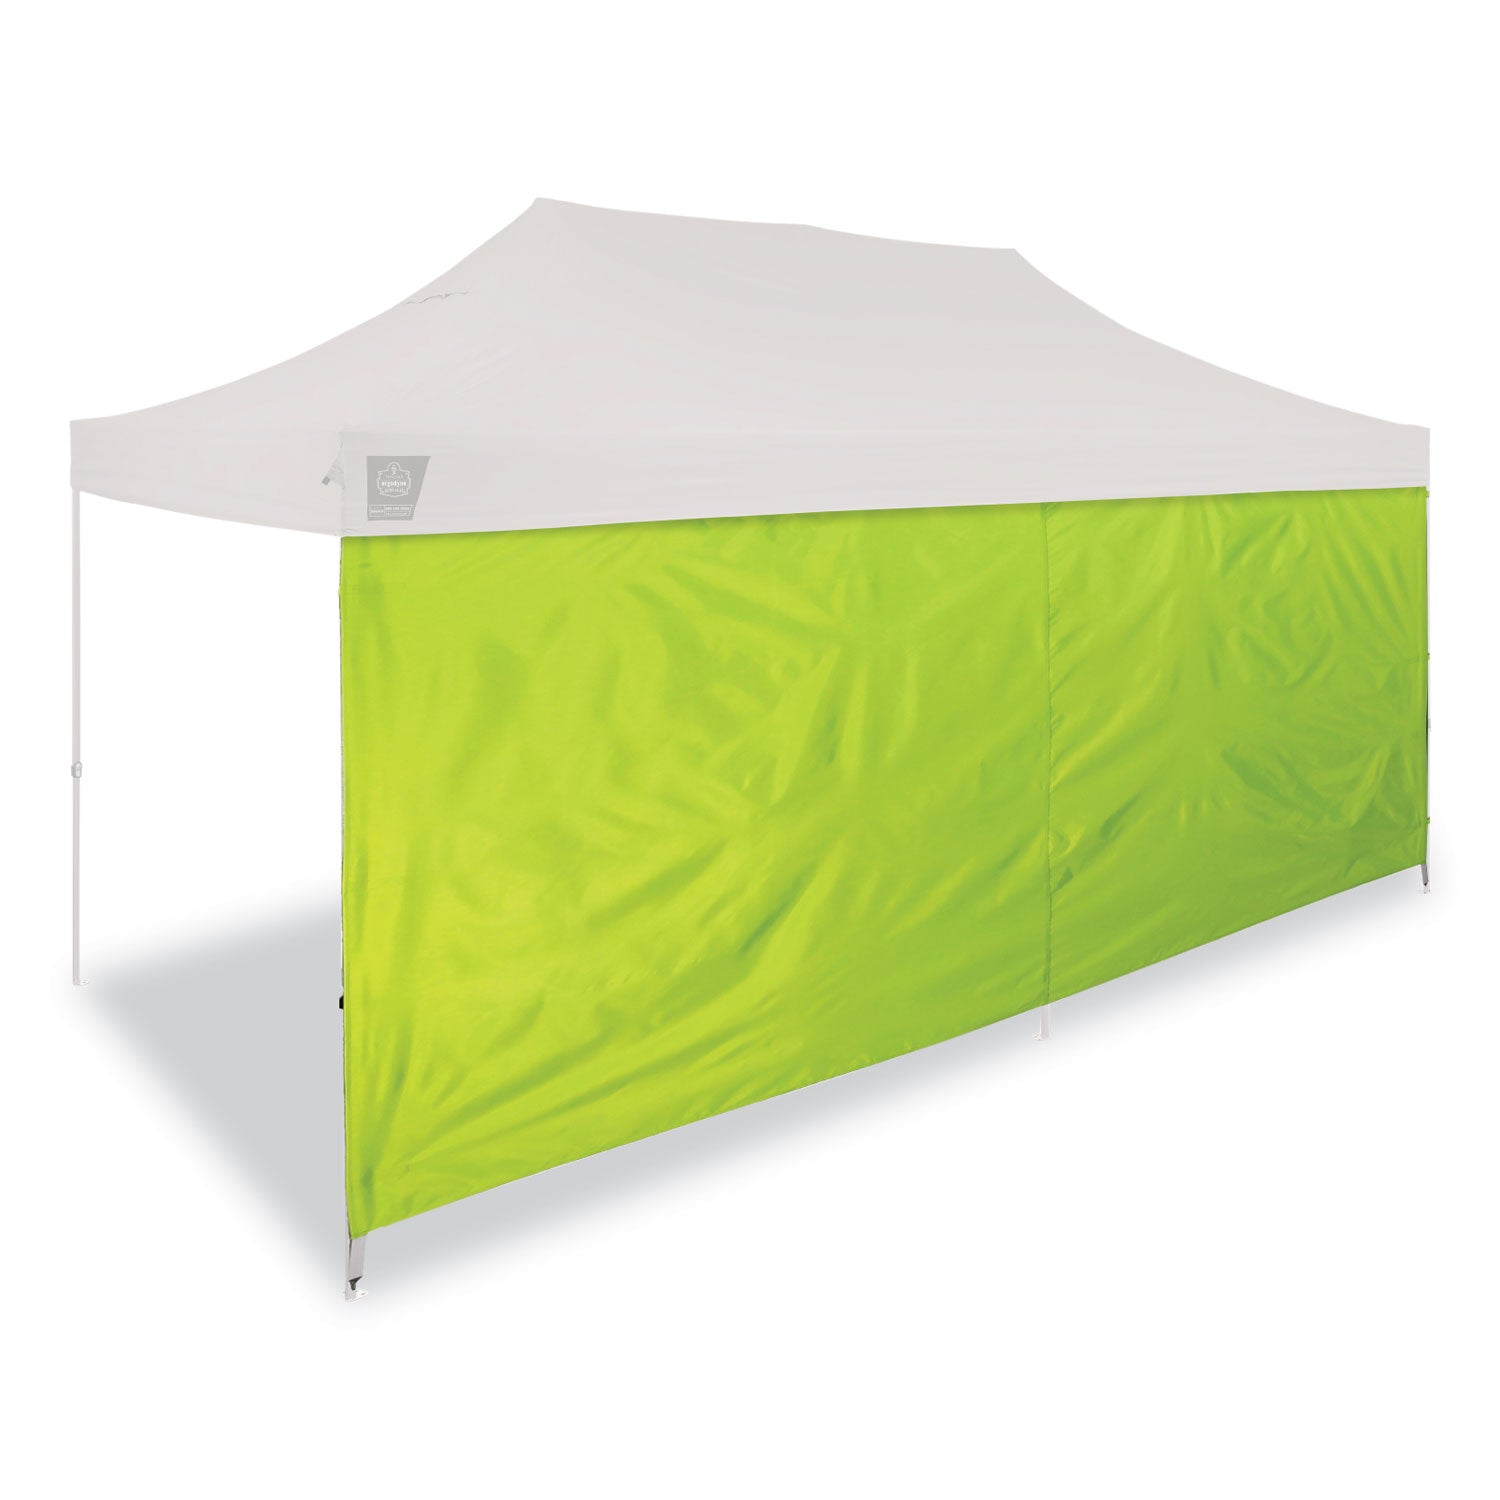 shax-6097-pop-up-tent-sidewall-single-skin-10-ft-x-10-ft-polyester-lime-ships-in-1-3-business-days_ego12995 - 1